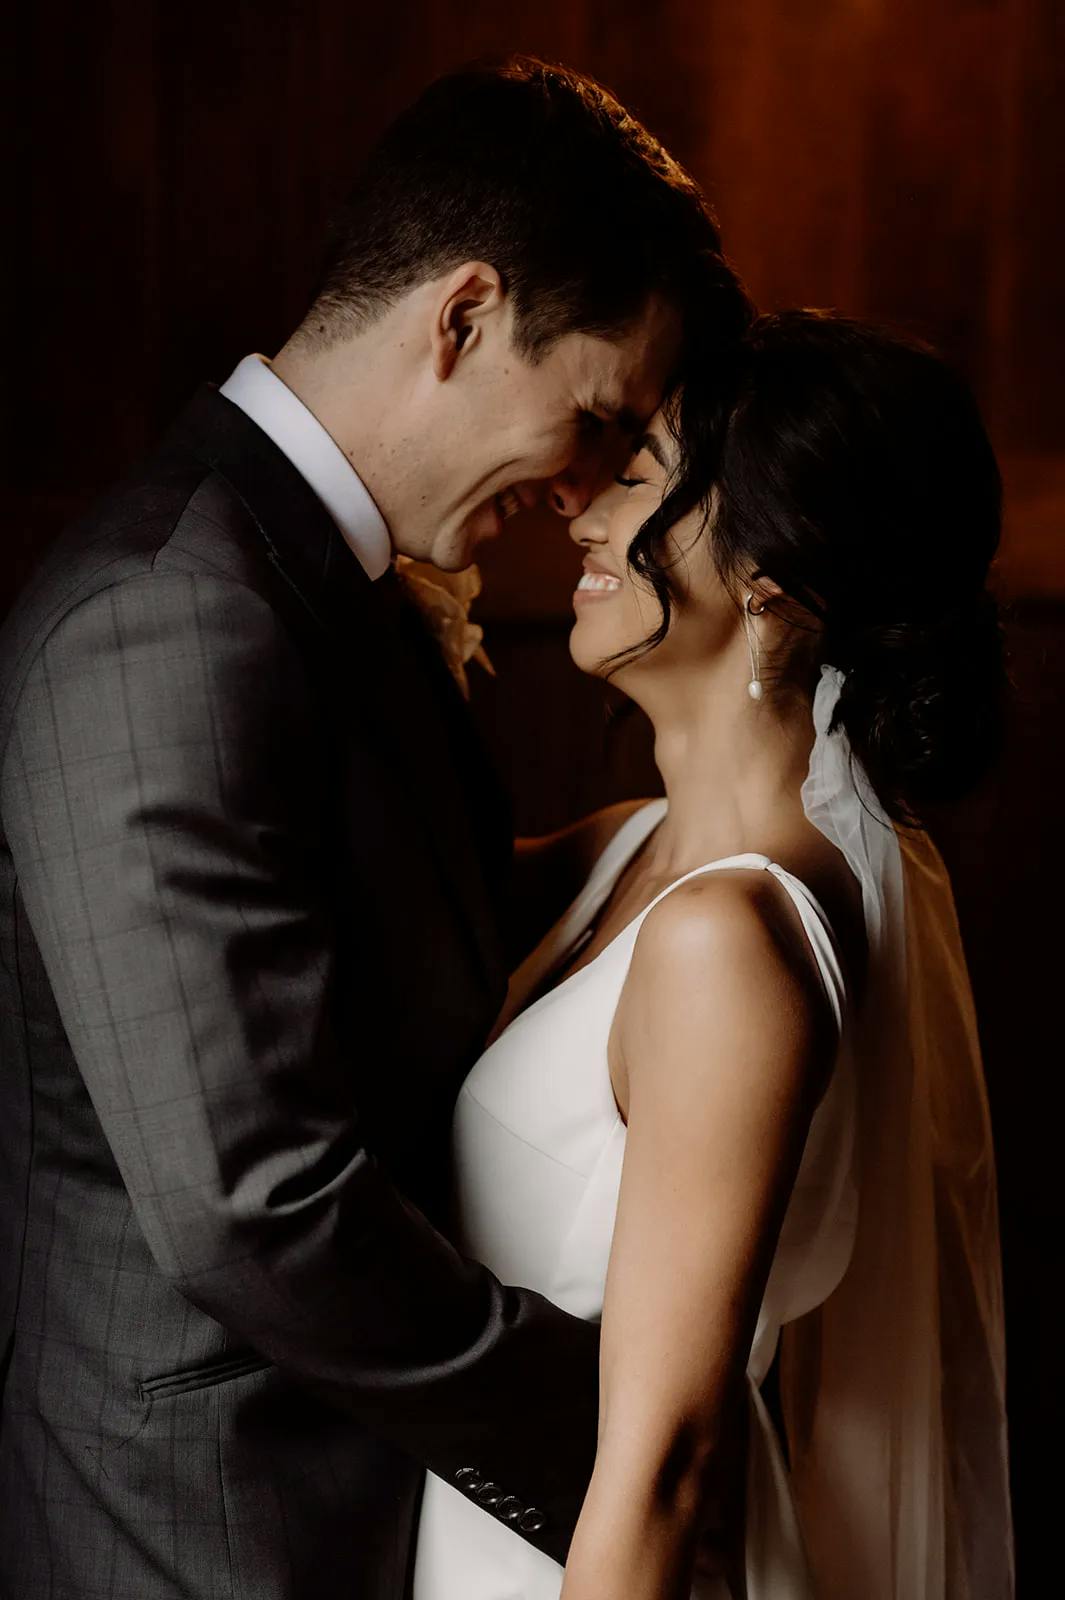 A bride and groom stand closely, forehead to forehead, smiling and basking in a warm light. The bride wears a white dress with a veil and has her hair styled in a low bun. The groom is dressed in a dark suit with a white dress shirt.